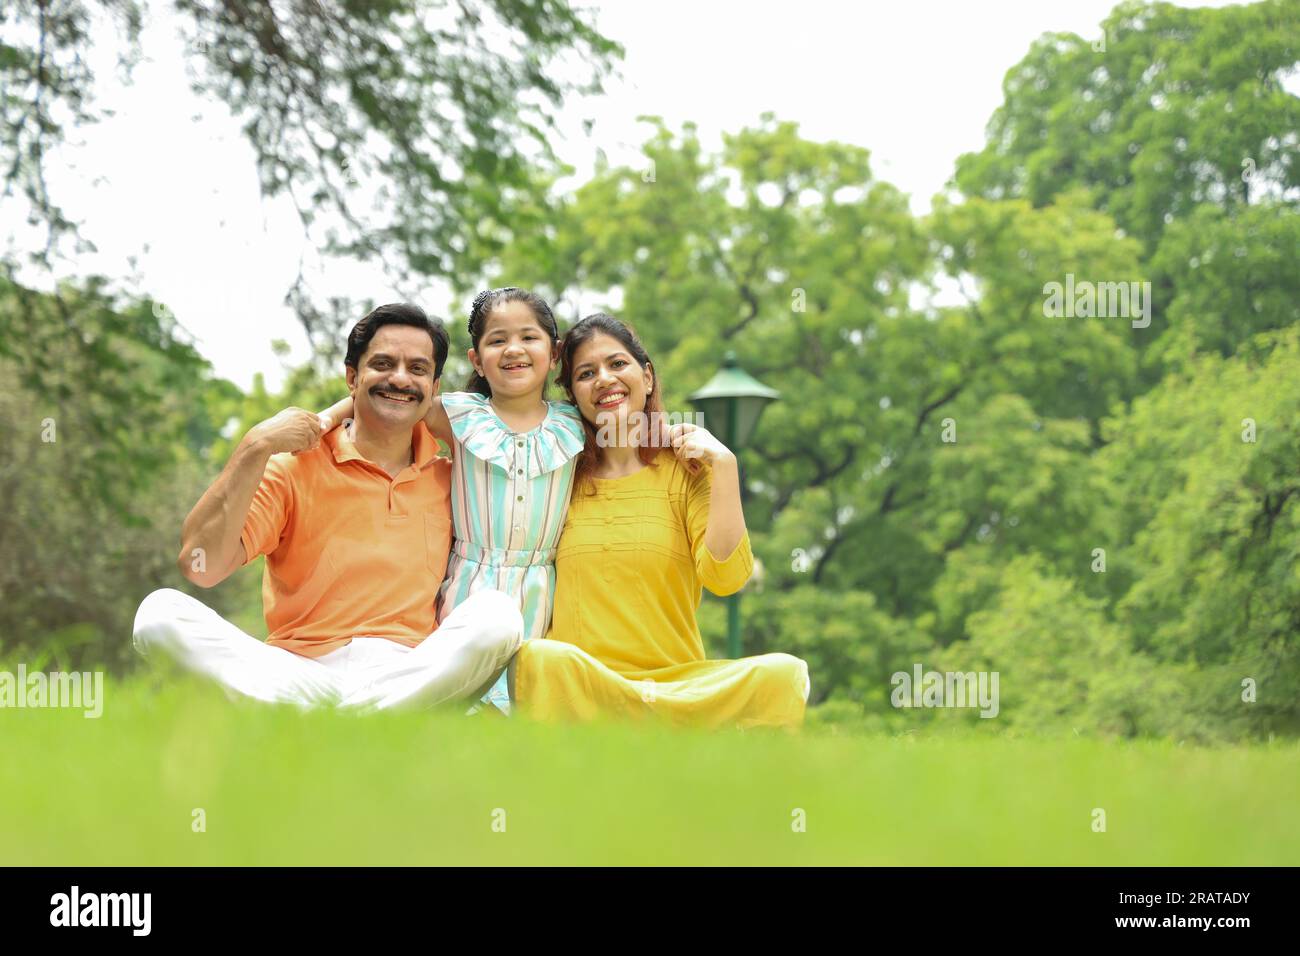 Happy Indian family with a girl child sitting together on grass and enjoying their family time early morning. The family is looking at the camera. Stock Photo